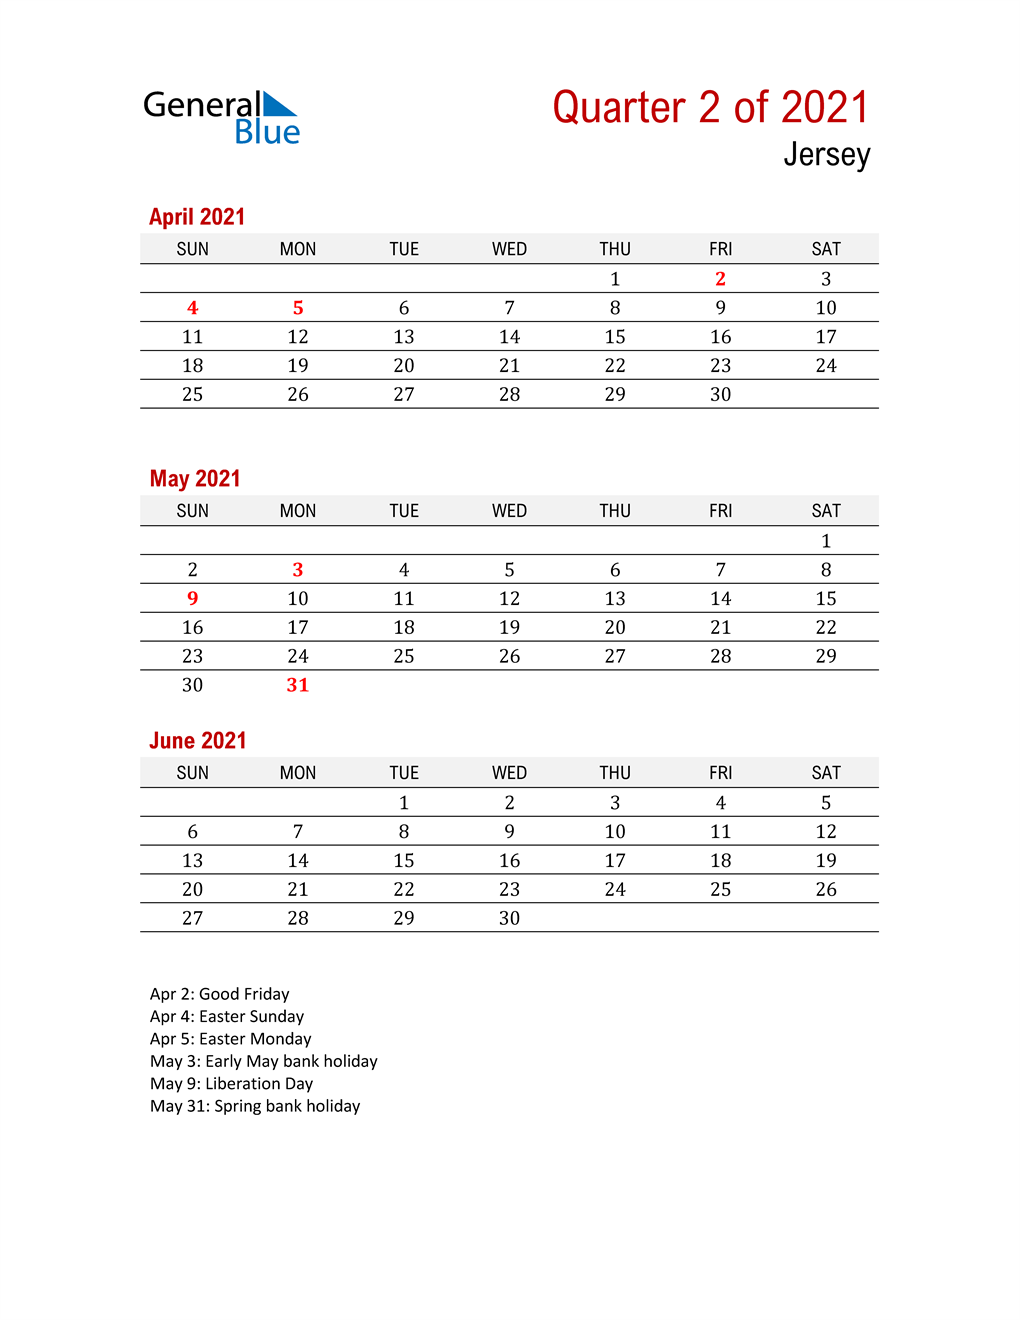  Printable Three Month Calendar for Jersey